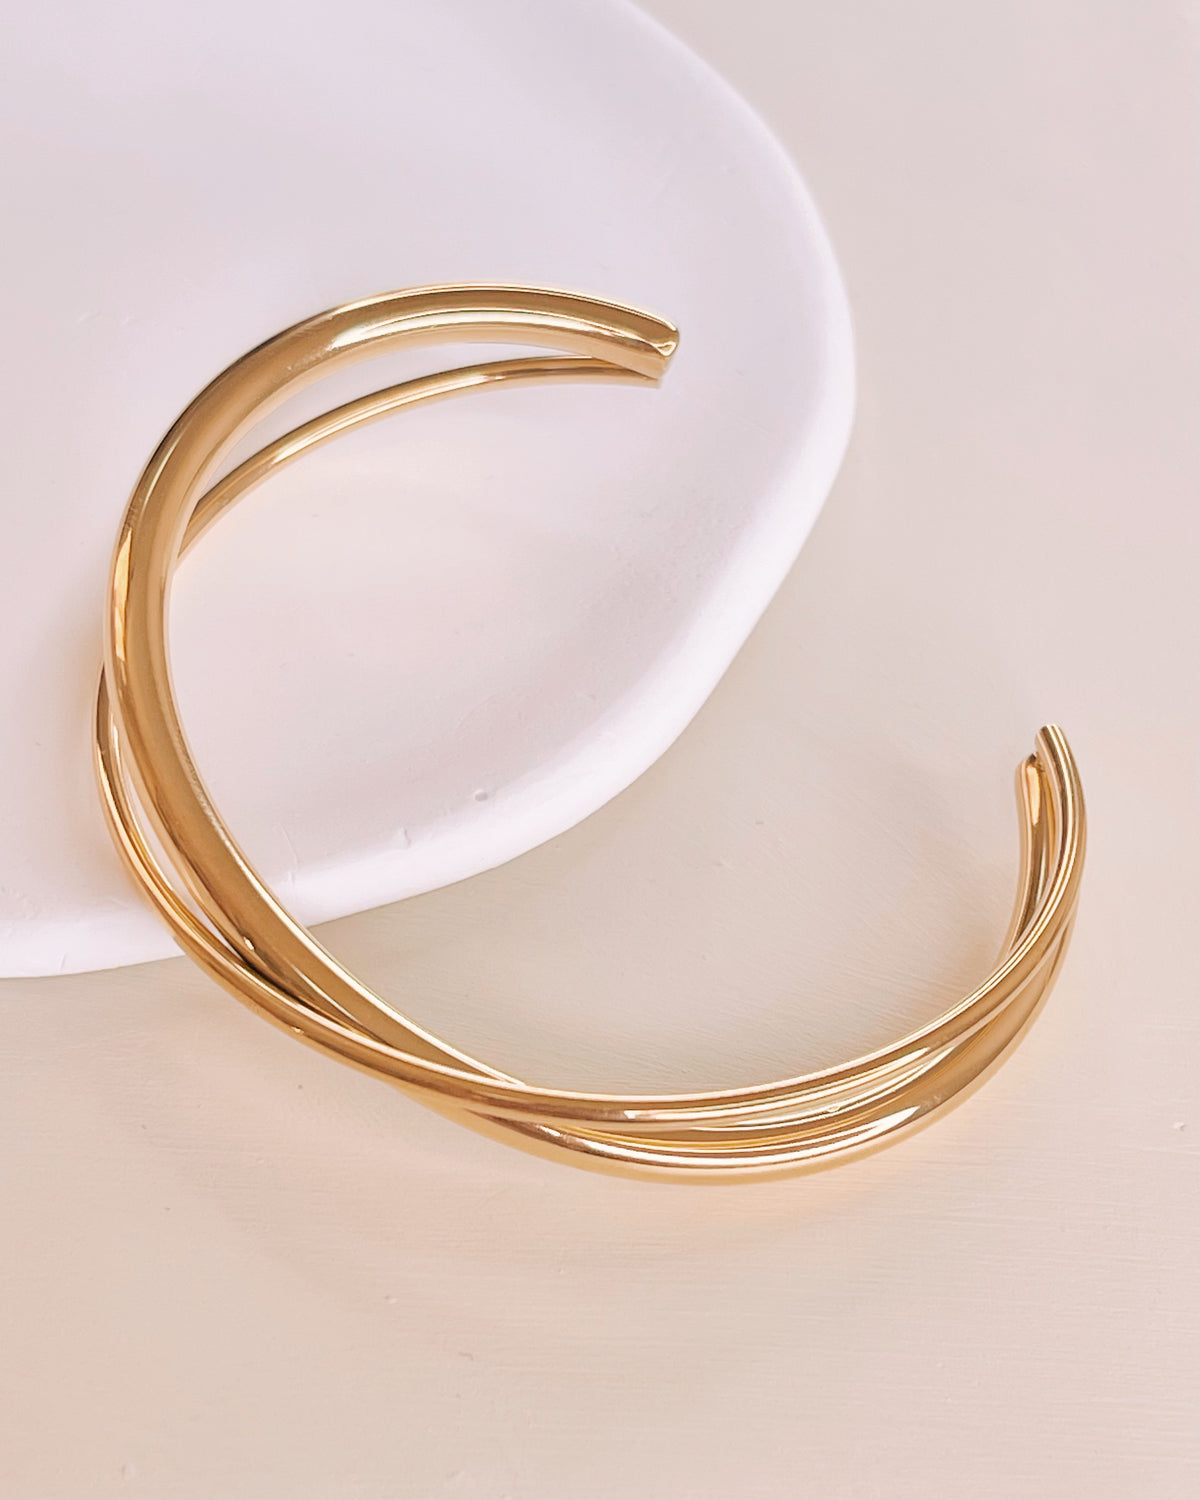 Nellie Intertwined Design Gold Bangle